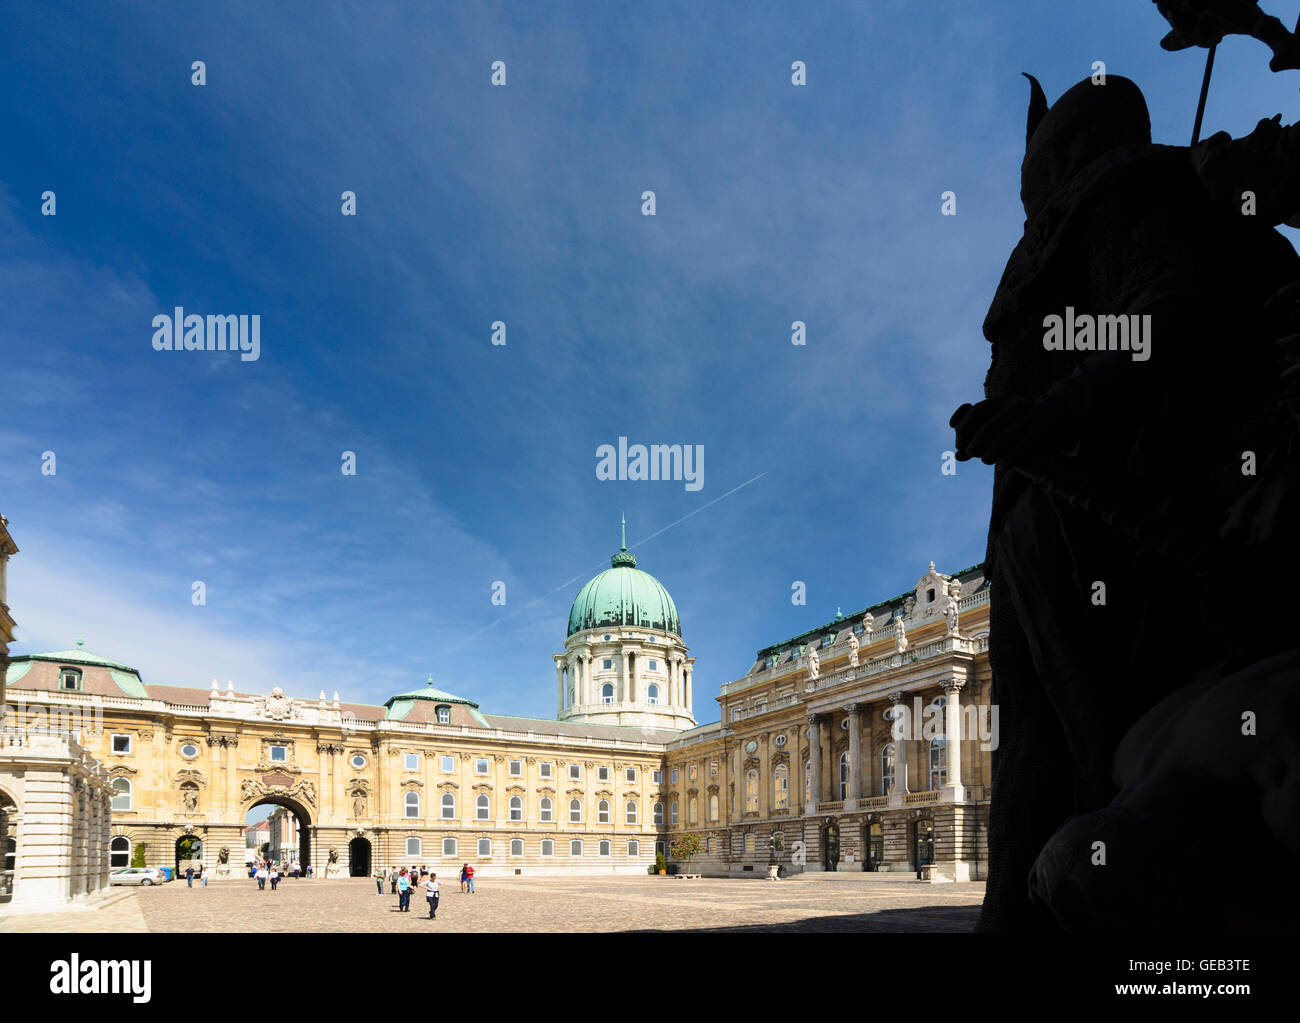 Budapest: Courtyard of the castle palace with Knights figure, Hungary, Budapest, Stock Photo